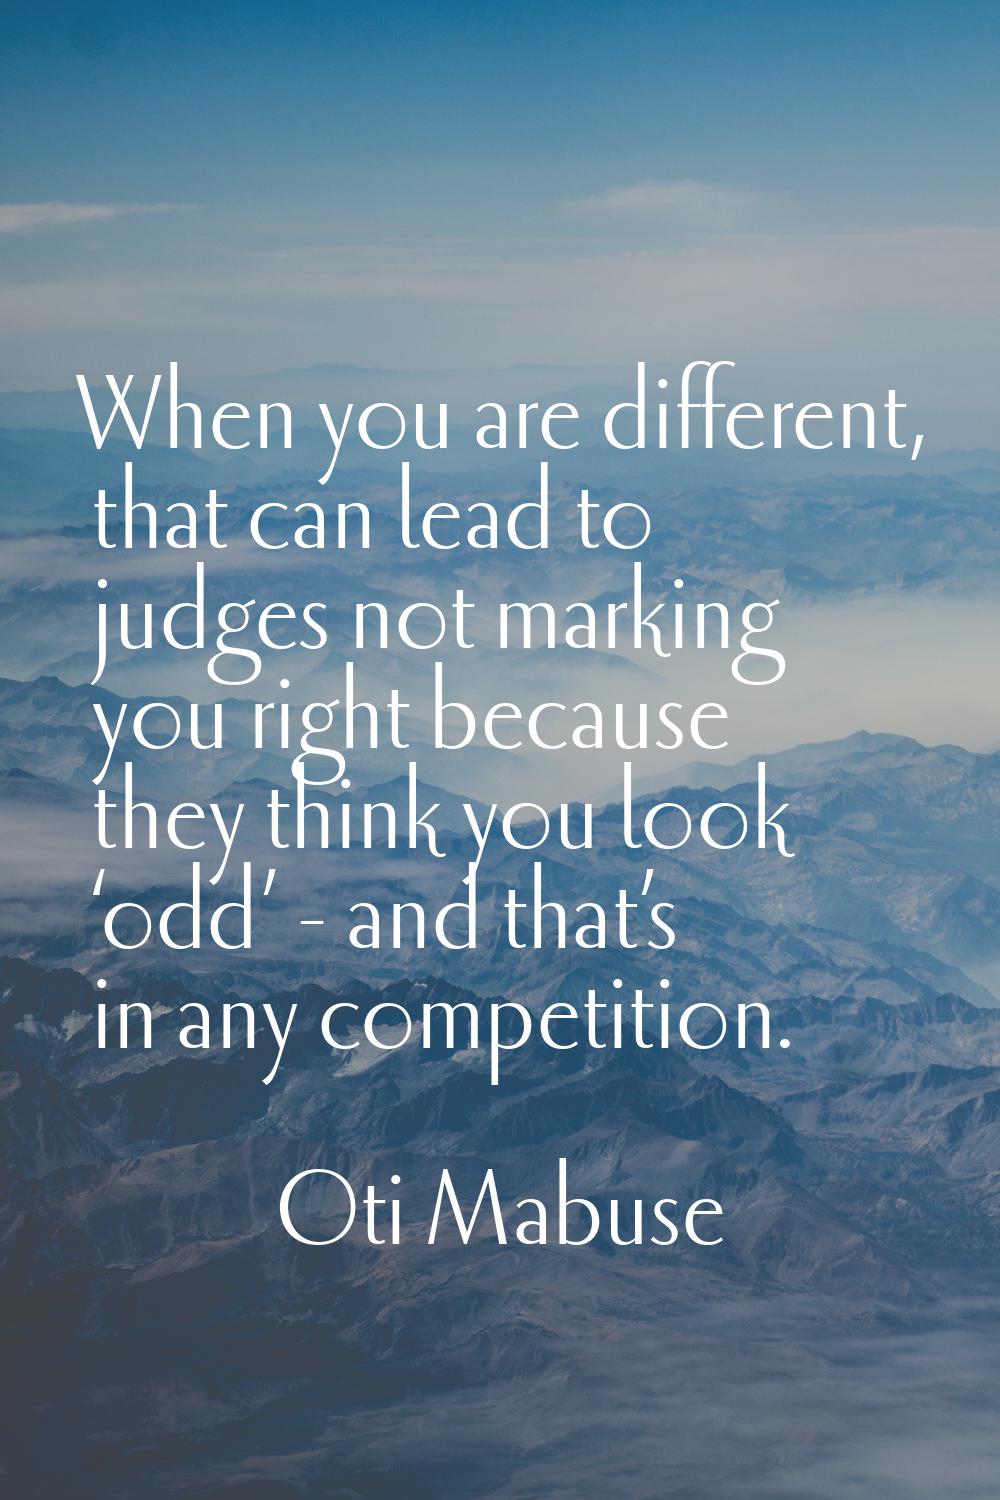 When you are different, that can lead to judges not marking you right because they think you look ‘